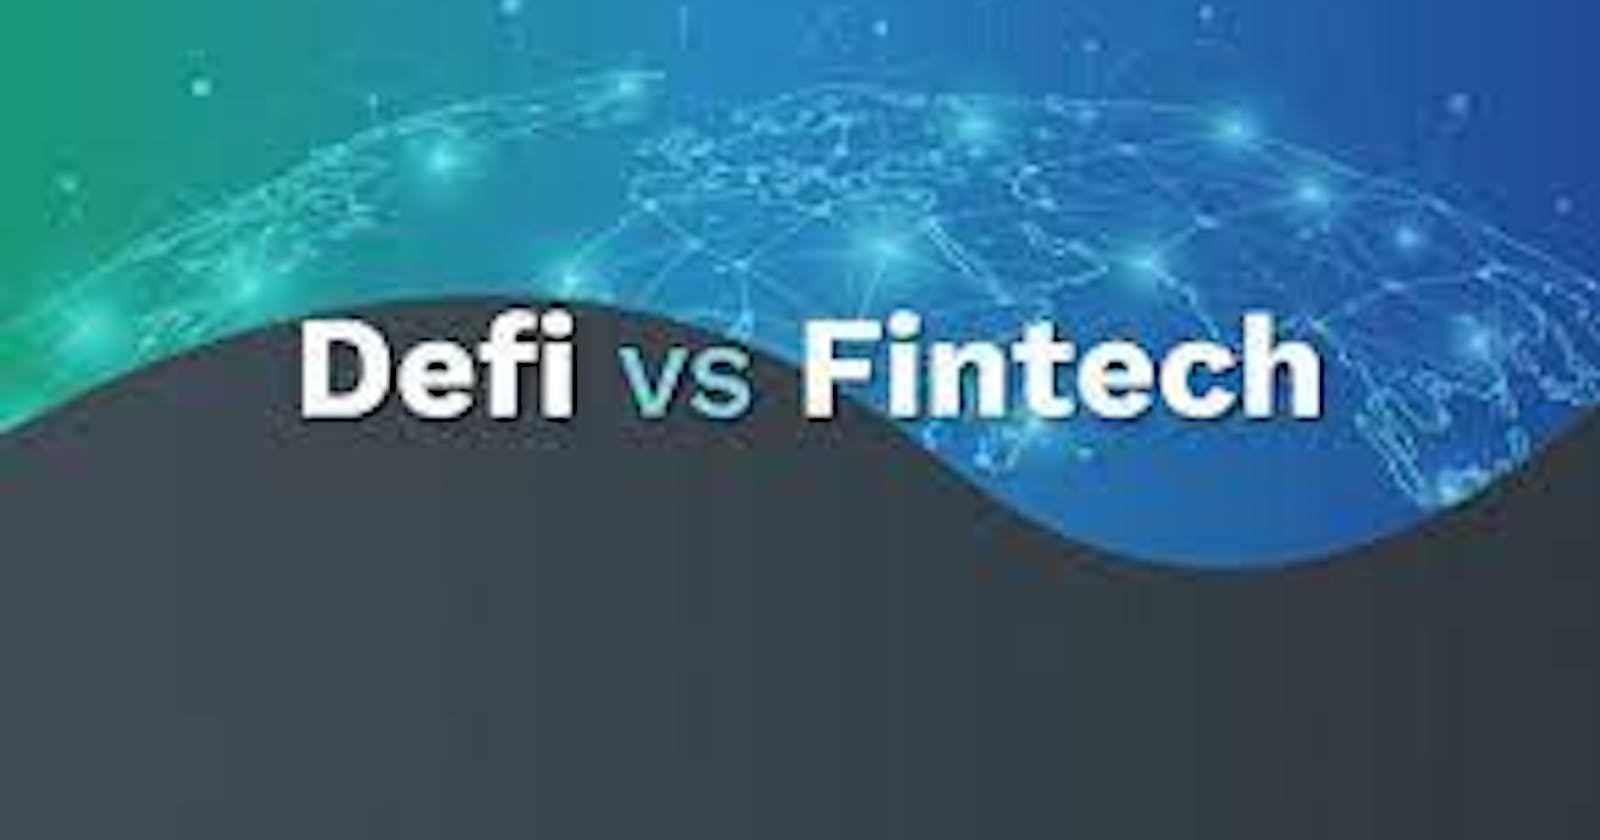 Would DeFi Adoption Become an End to Fintechs?